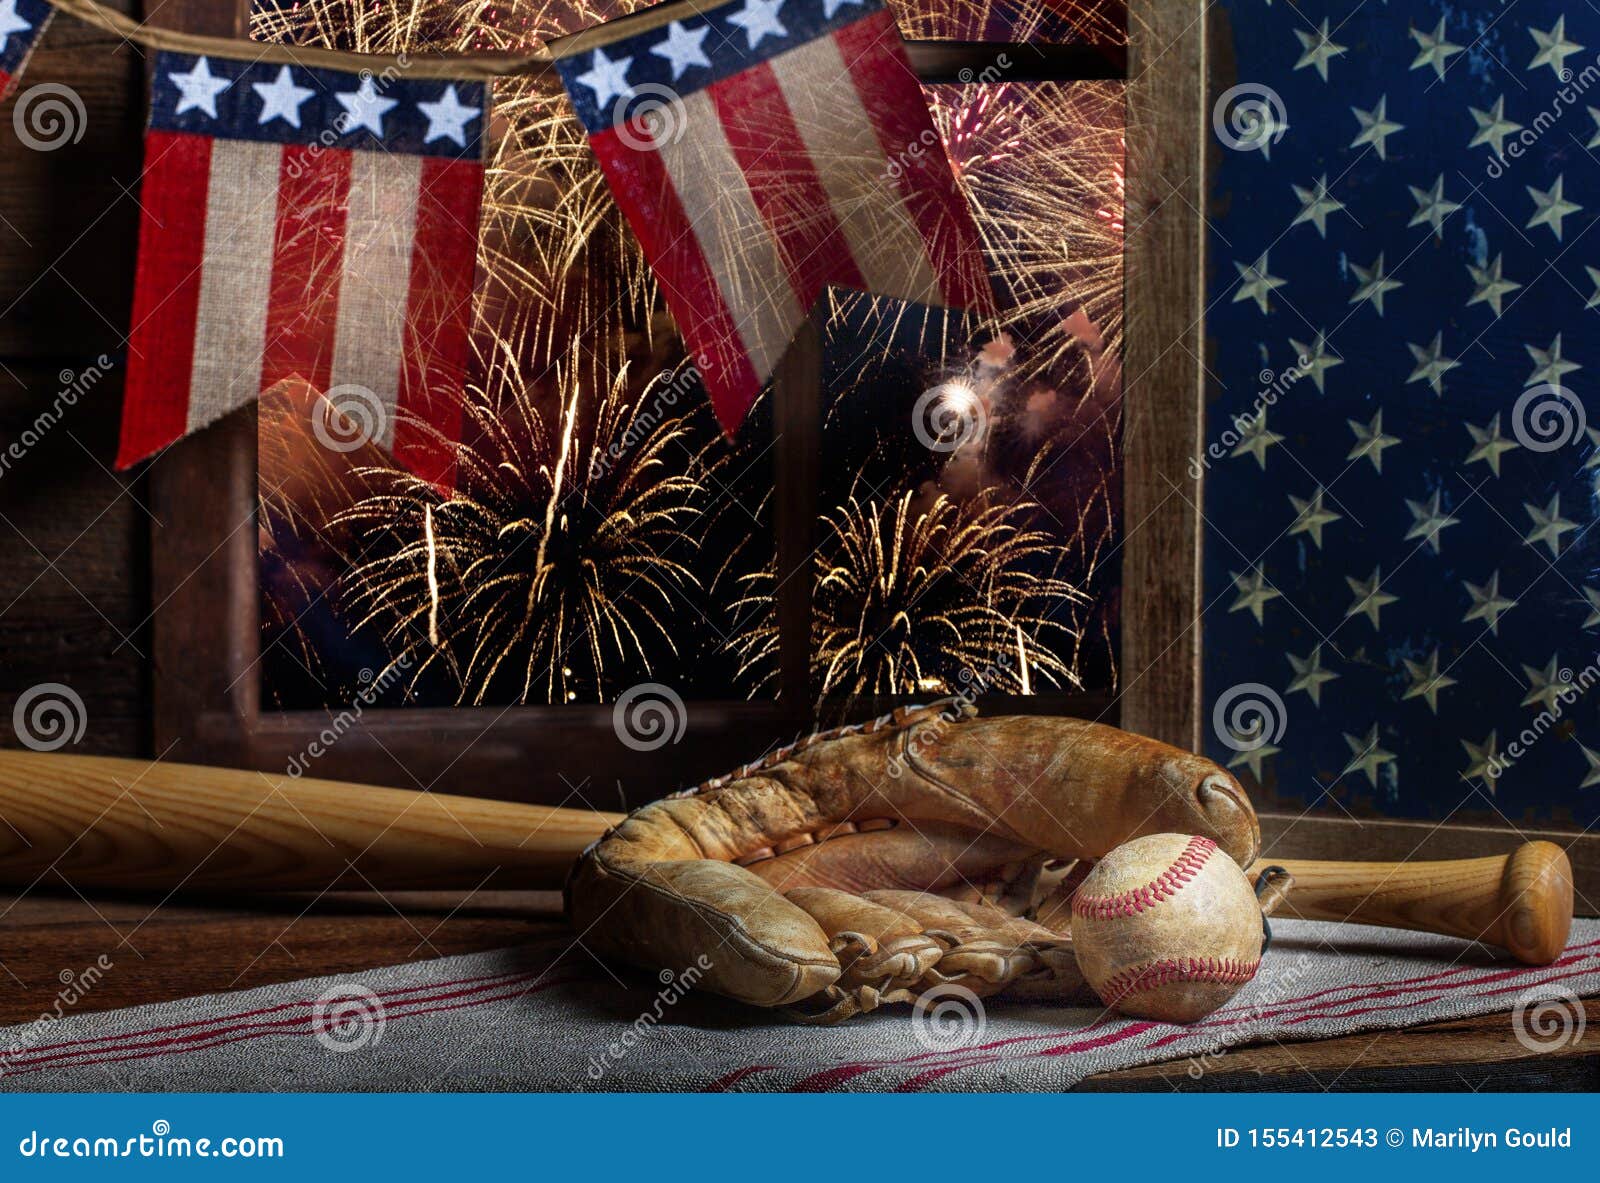 Baseball and Mitt 4th of July Stock Image - Image of independence